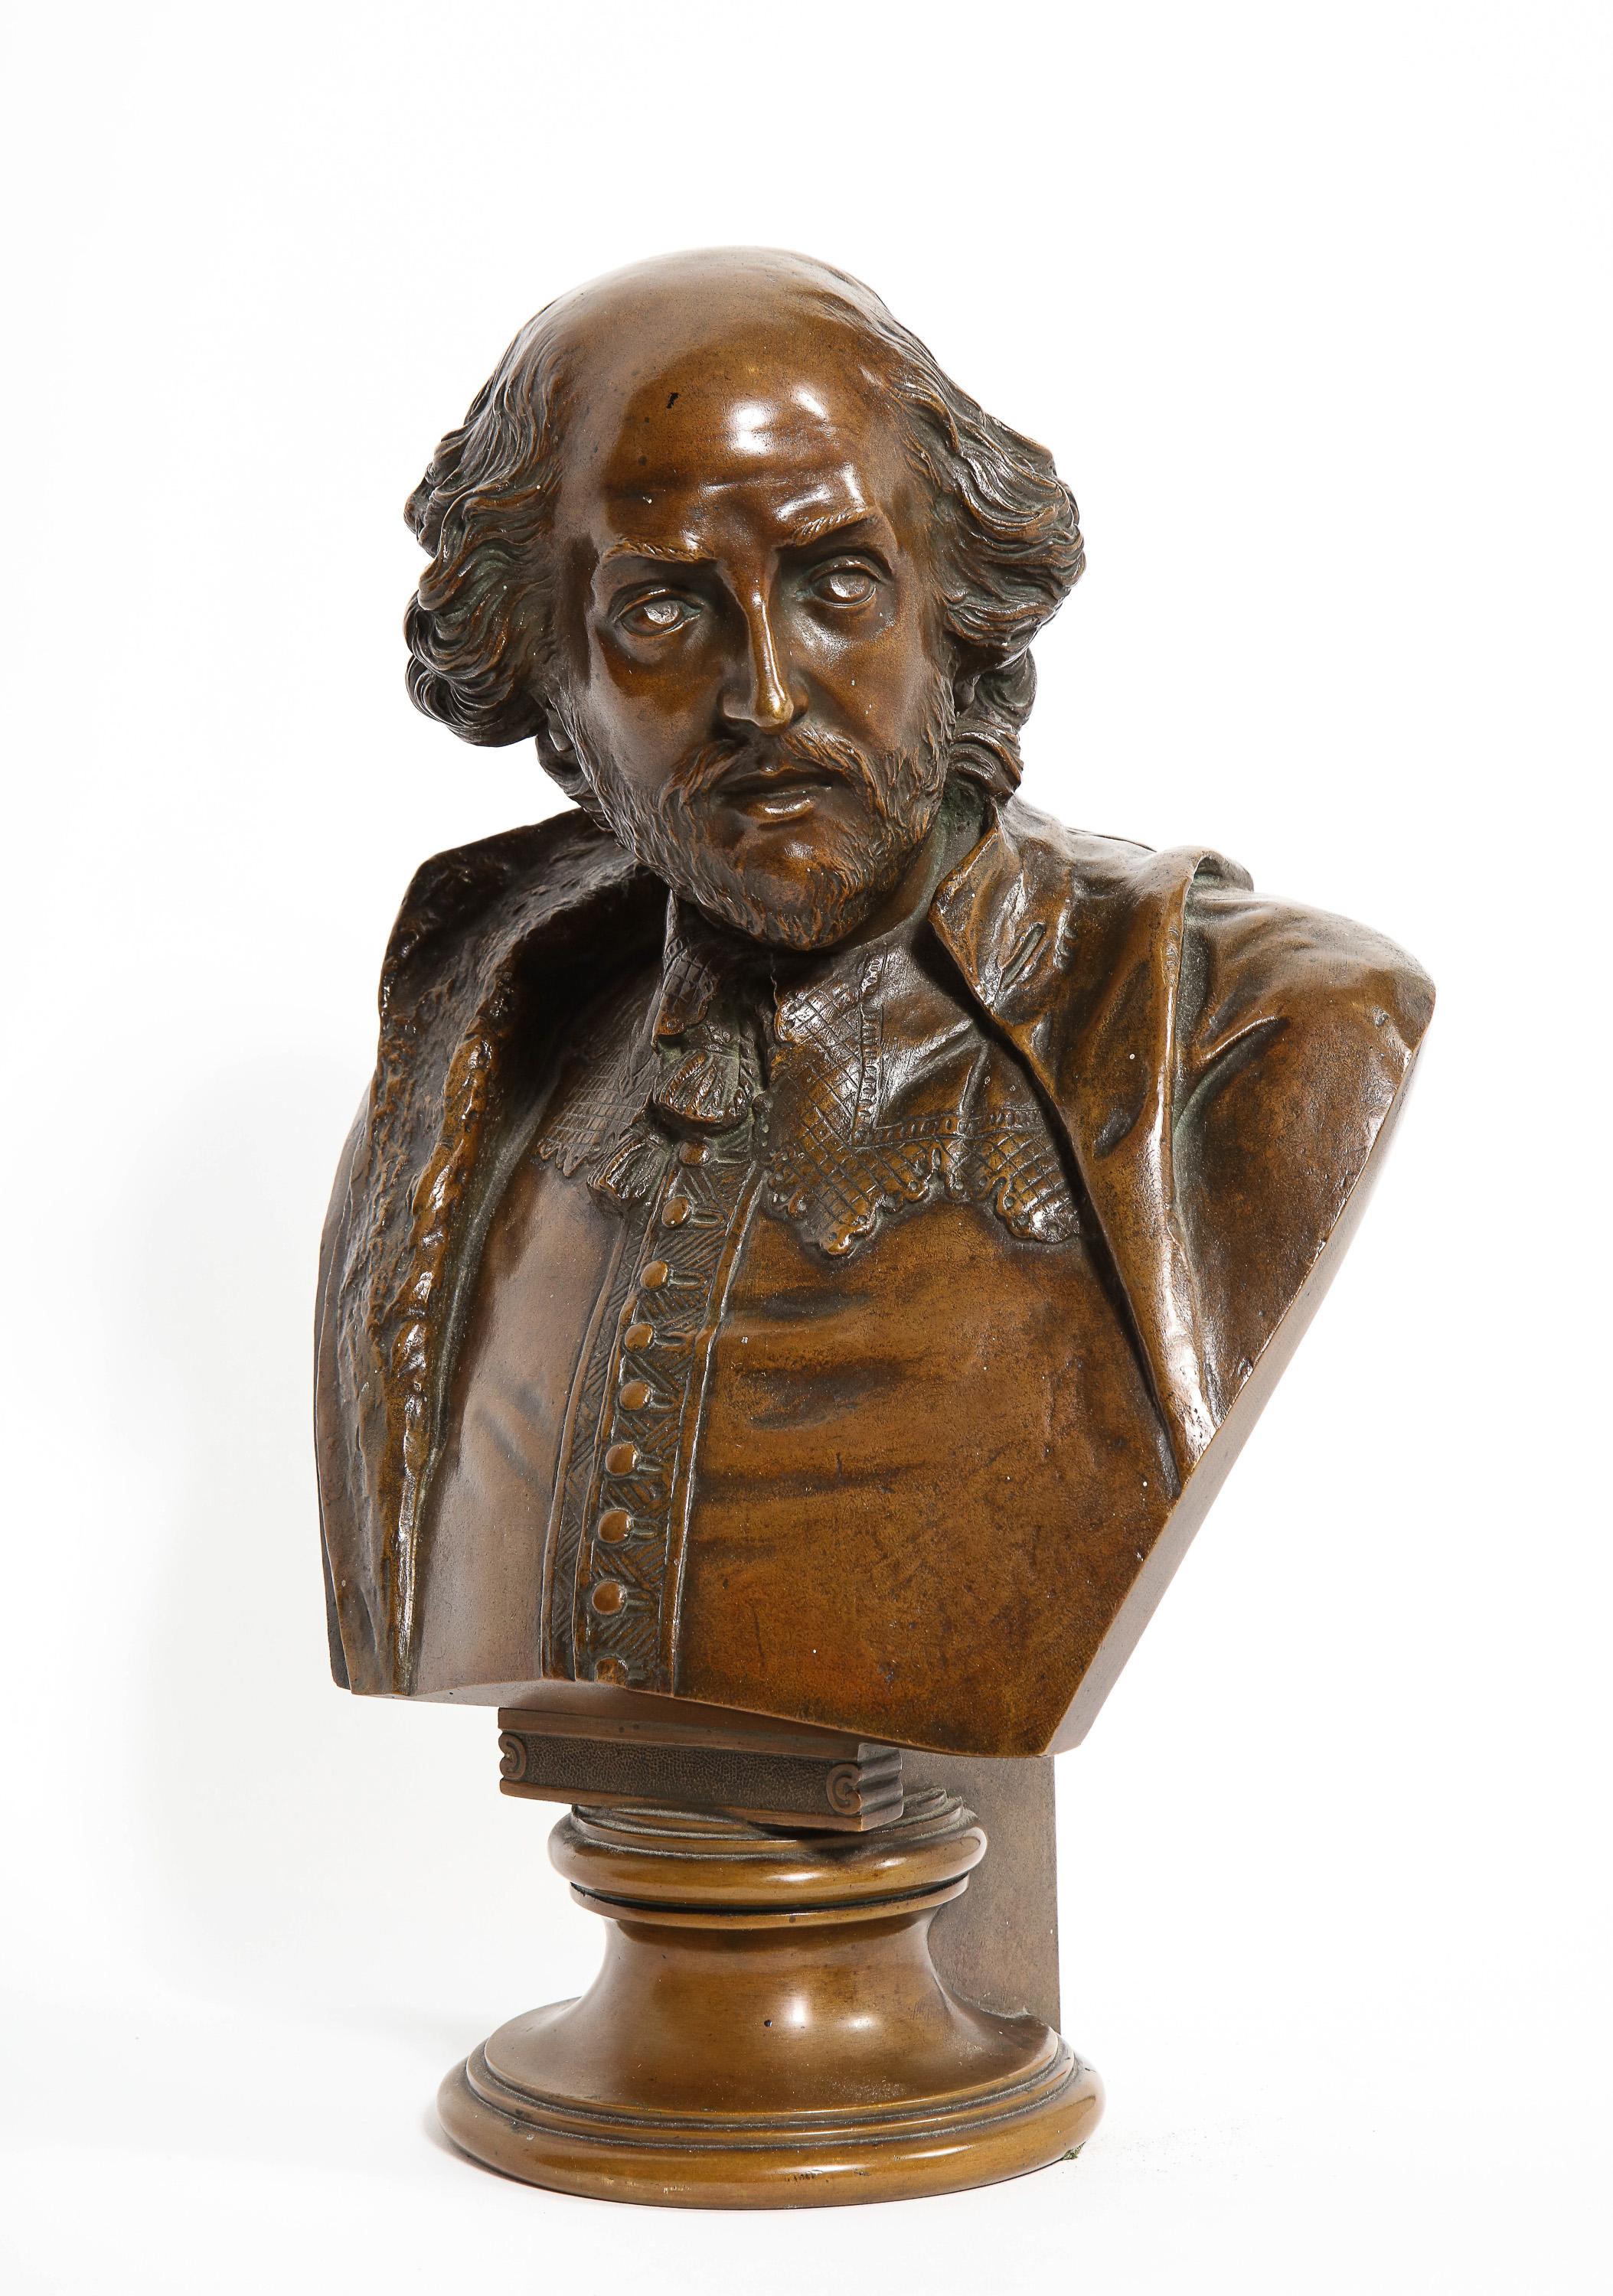 A realistic German bronze bust of William Shakespeare by Aktien-Gesellschaft Gladenbeck and Sohn foundry, circa 1890

Very fine quality bust, nice patination. Would look great in a library or a gentlemans office. 

Signed on the